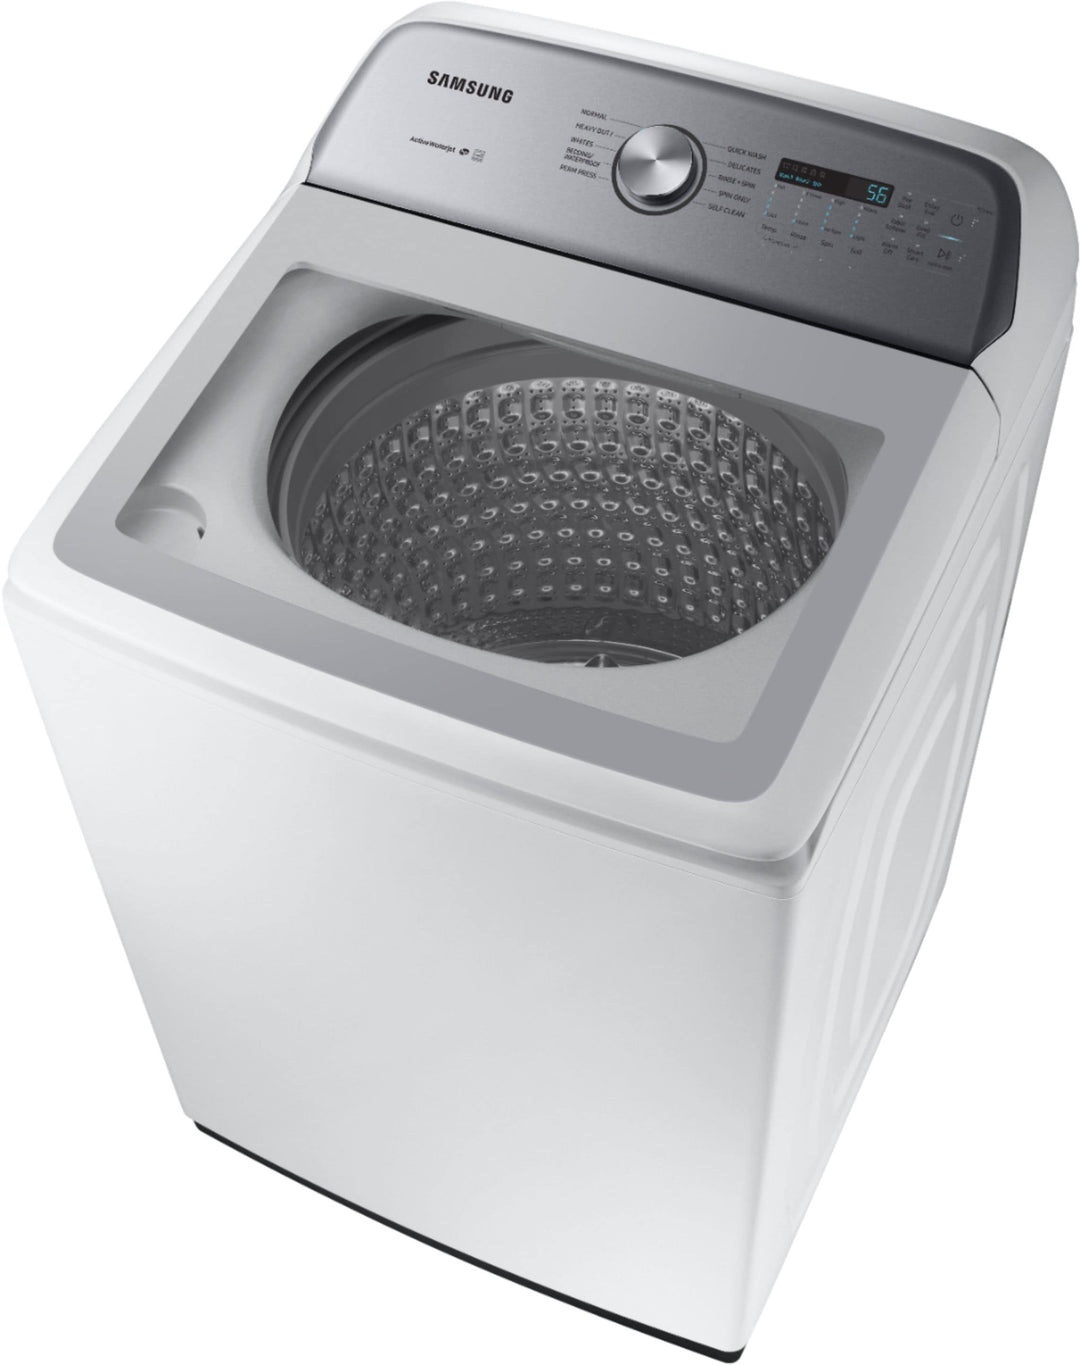 Samsung - 5.0 Cu. Ft. High Efficiency Top Load Washer with Active WaterJet - White_3